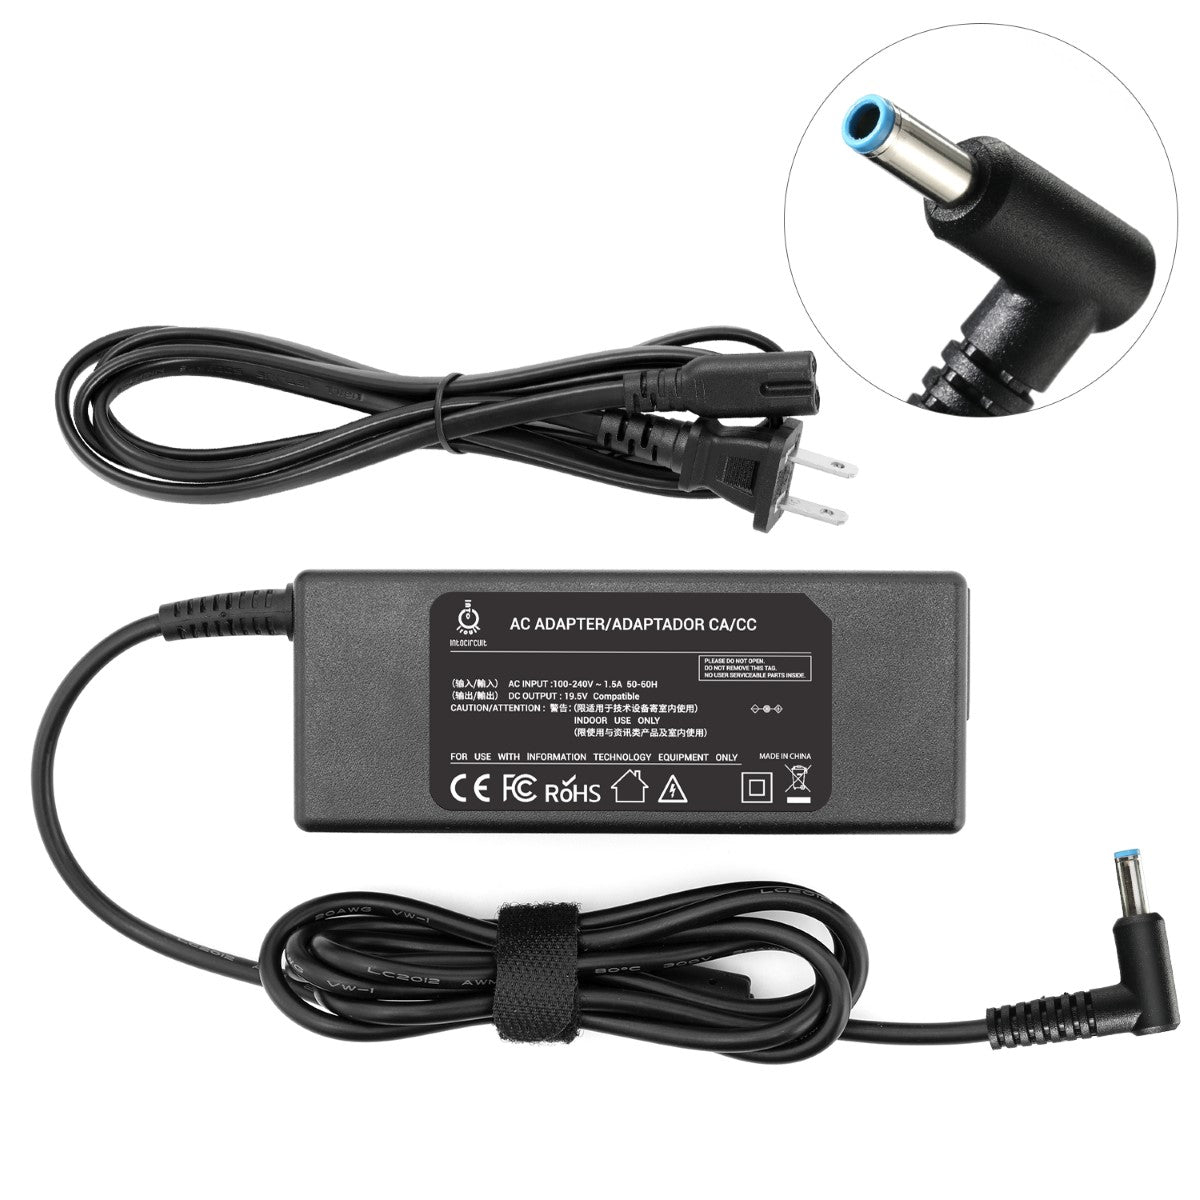 Charger for HP Envy Touchsmart 15-j150us